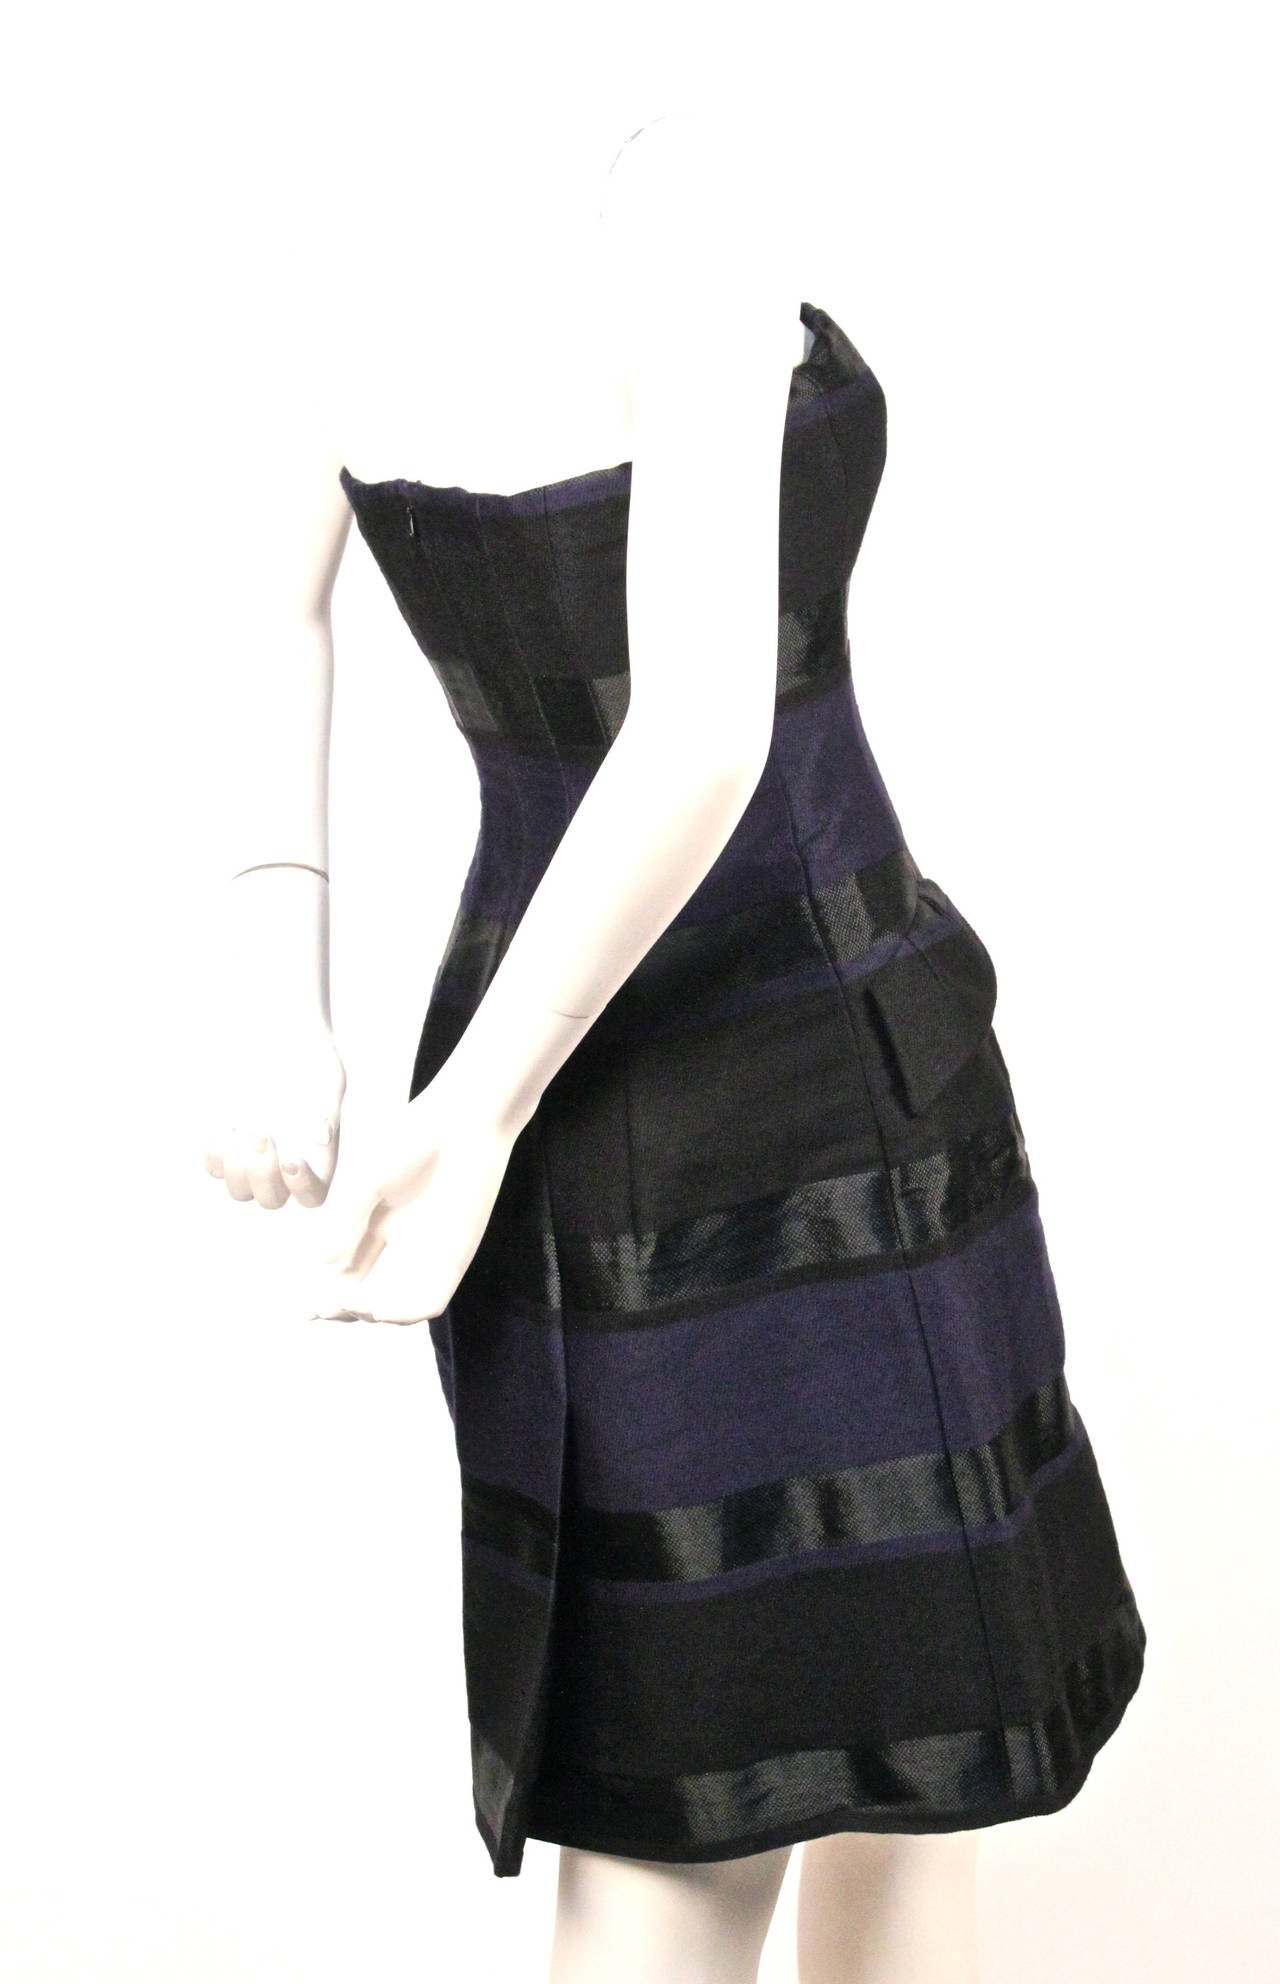 Strapless striped dress with corseted top designed by Raf Simons for Christian Dior dating to pre-fall of 2013. Labeled a French size 38. Approximate measurements: bust 32-33